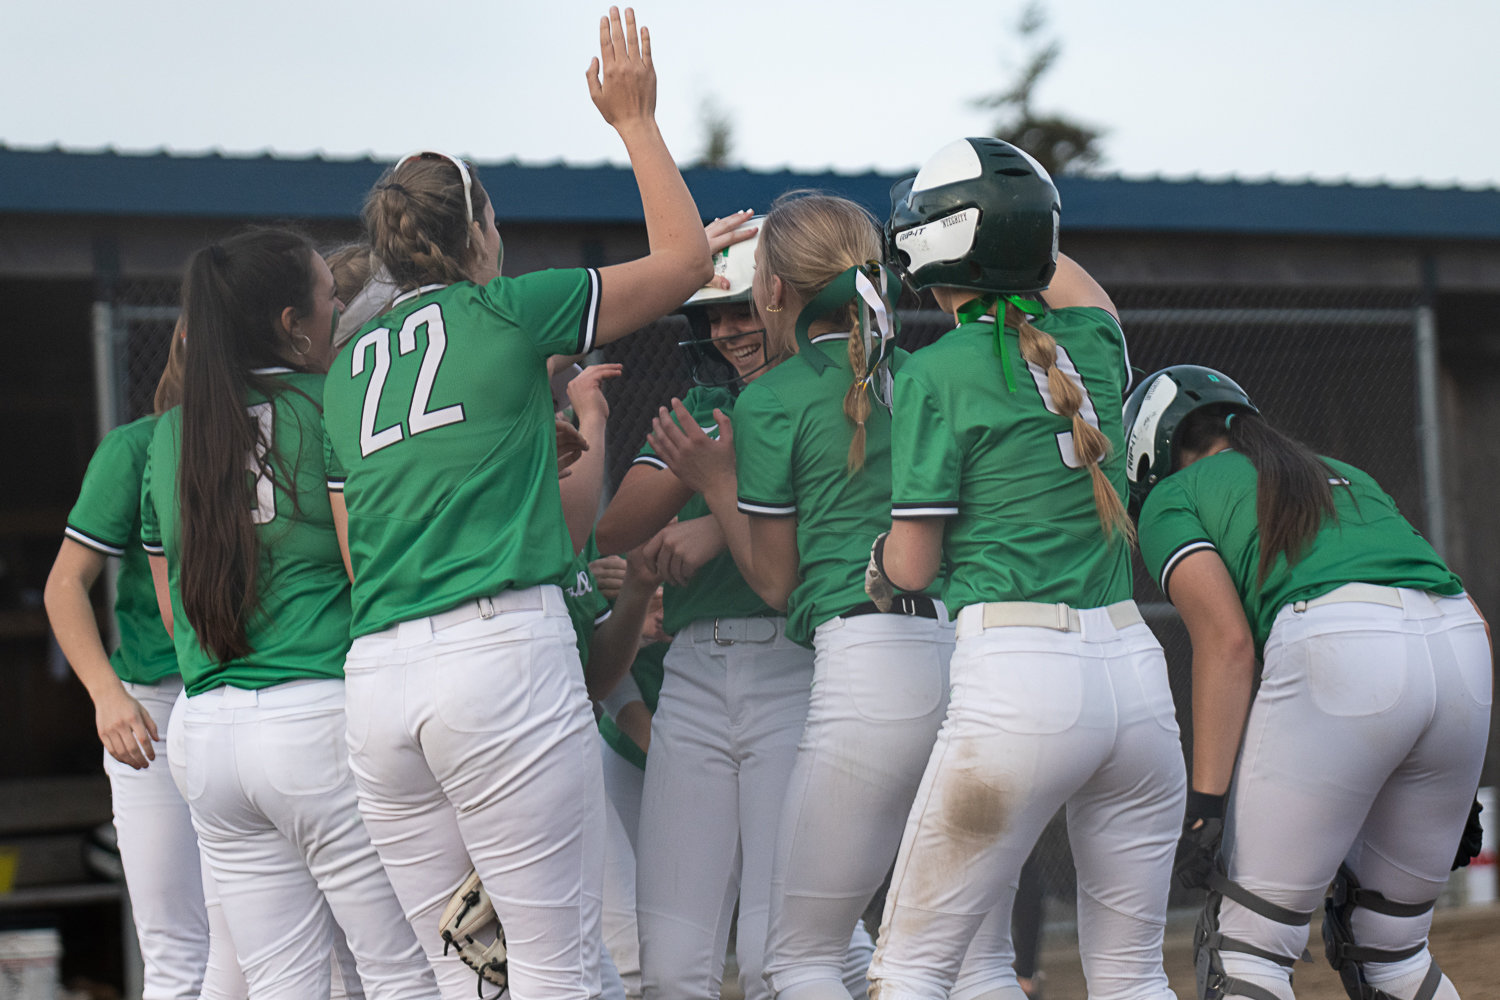 Kylie Waltermeyer's teammates welcome her at home plate after her two-run bomb in the seventh inning of Tumwater's 5-3 win over Rochester on March 29.